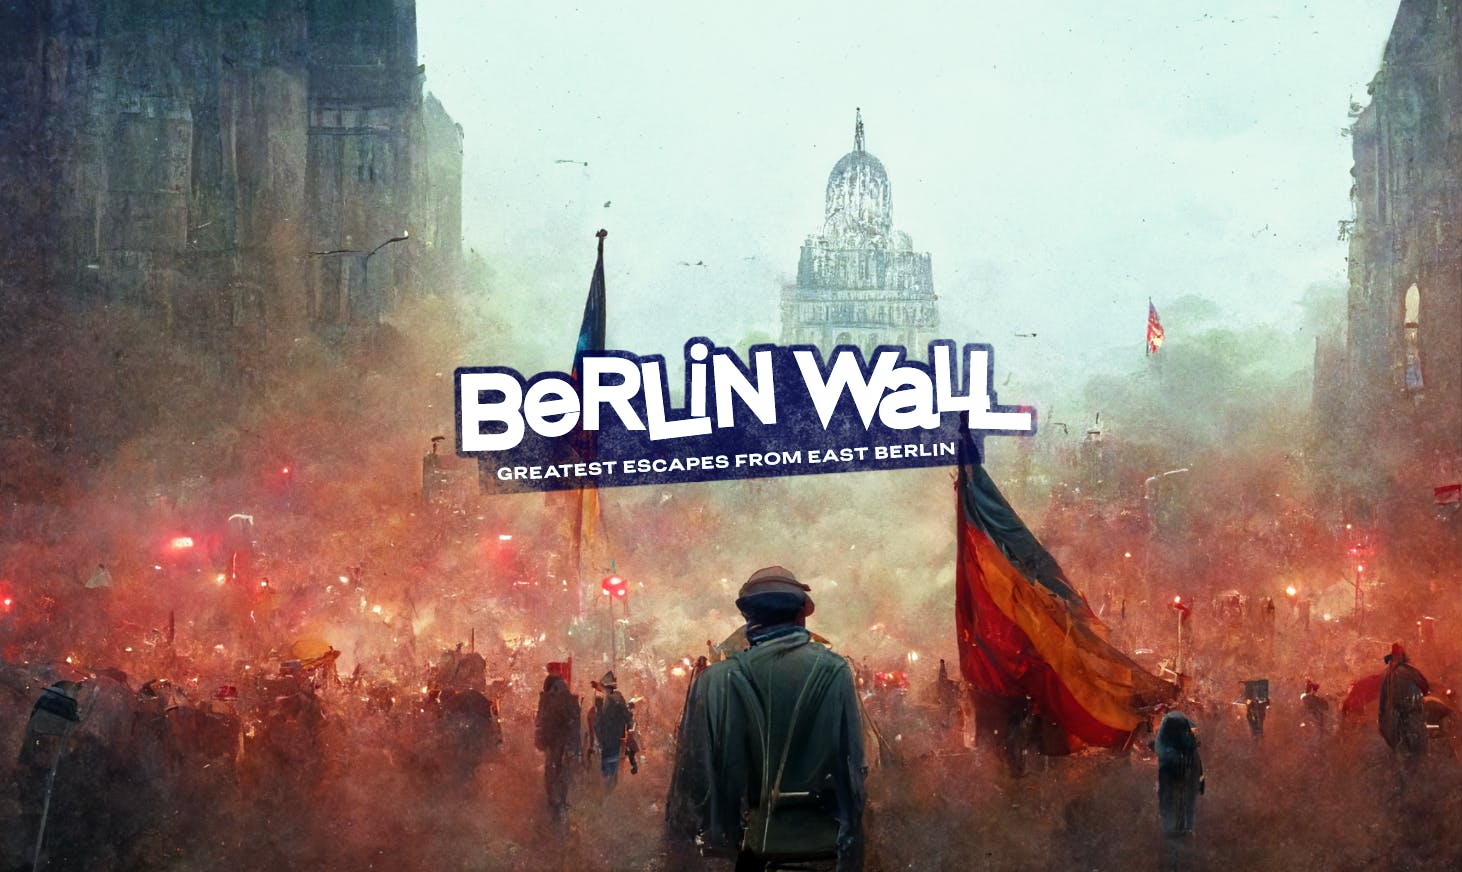 Berlin Wall escape stories walking tour and city game Musement